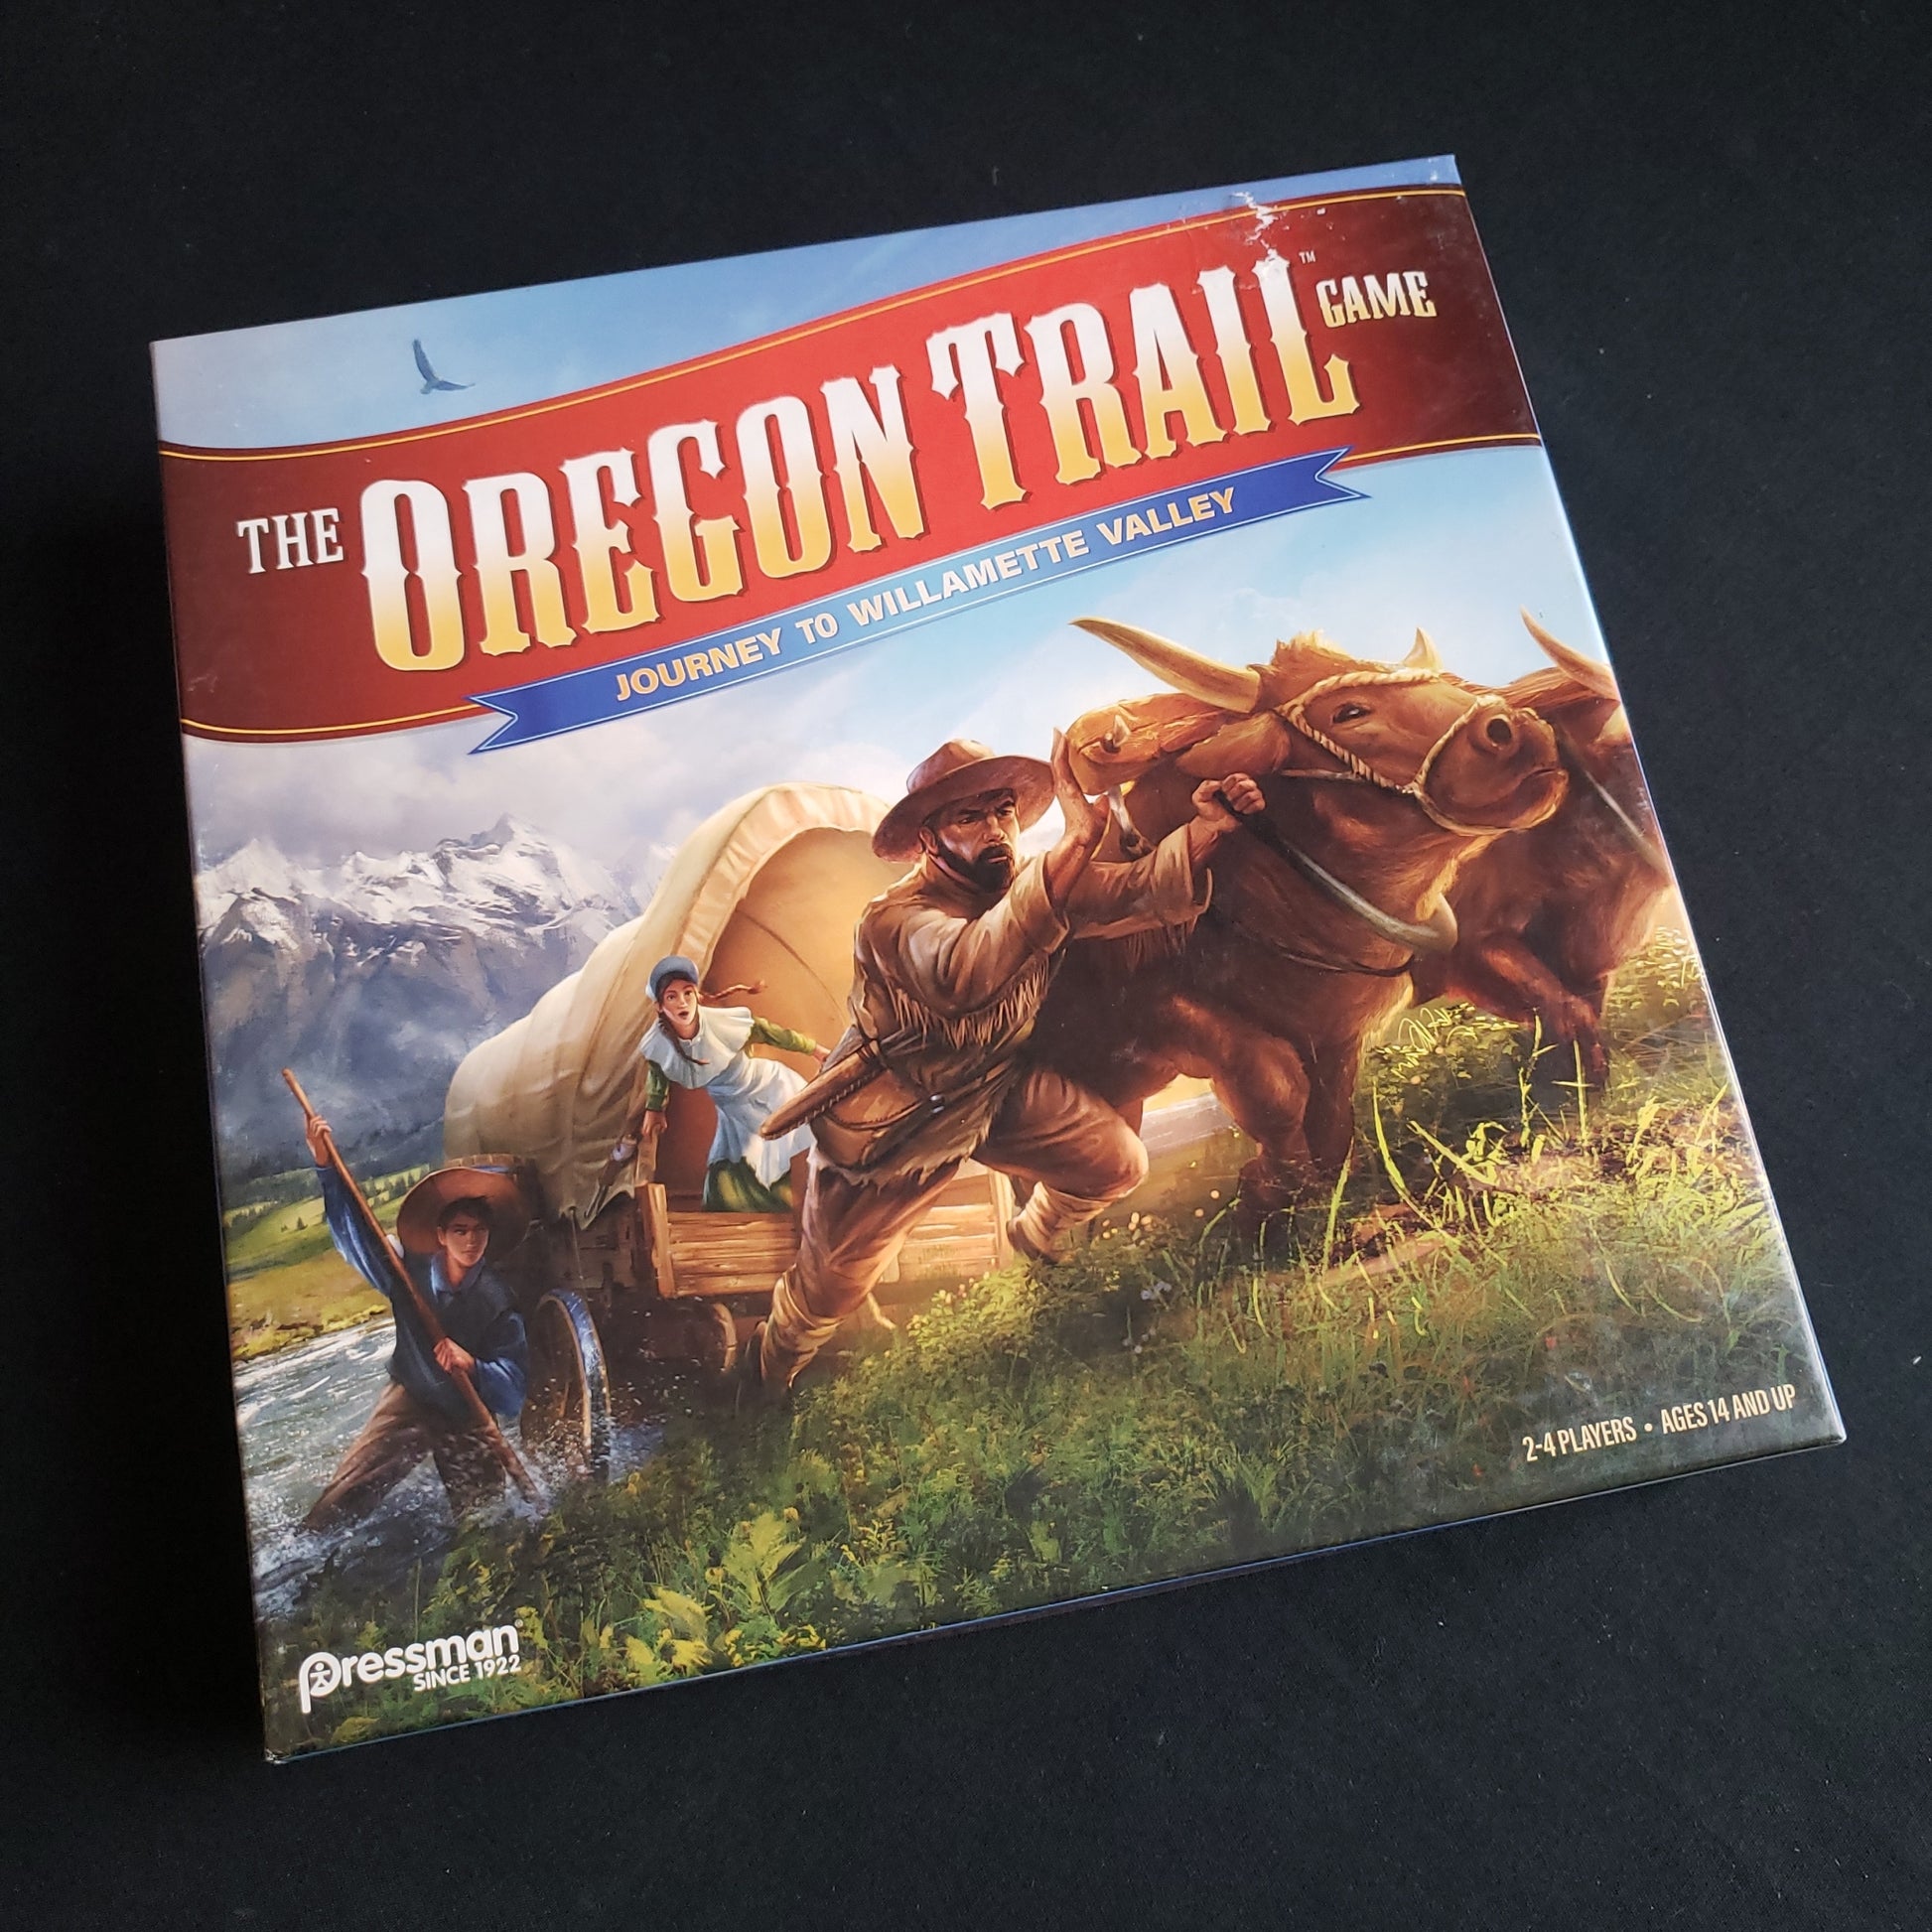 Image shows the front cover of the box of the Oregon Trail: Journey to Willamette Valley board game